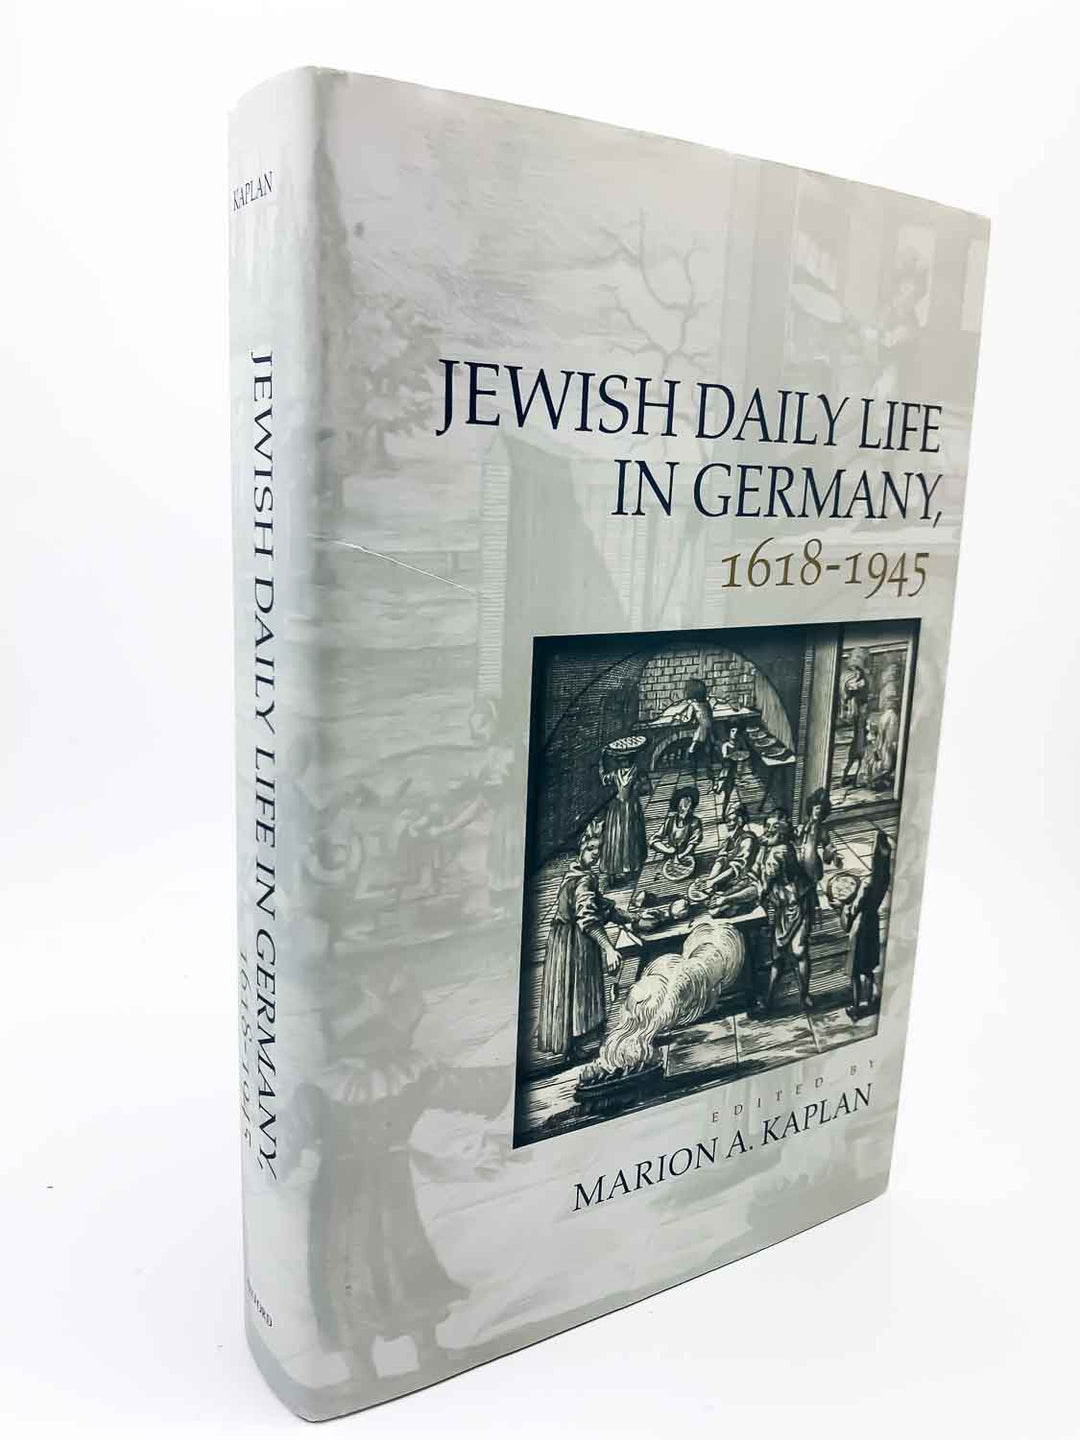 Marion A. Kaplan | Jewish Daily Life in Germany, 1618-1945Publishe